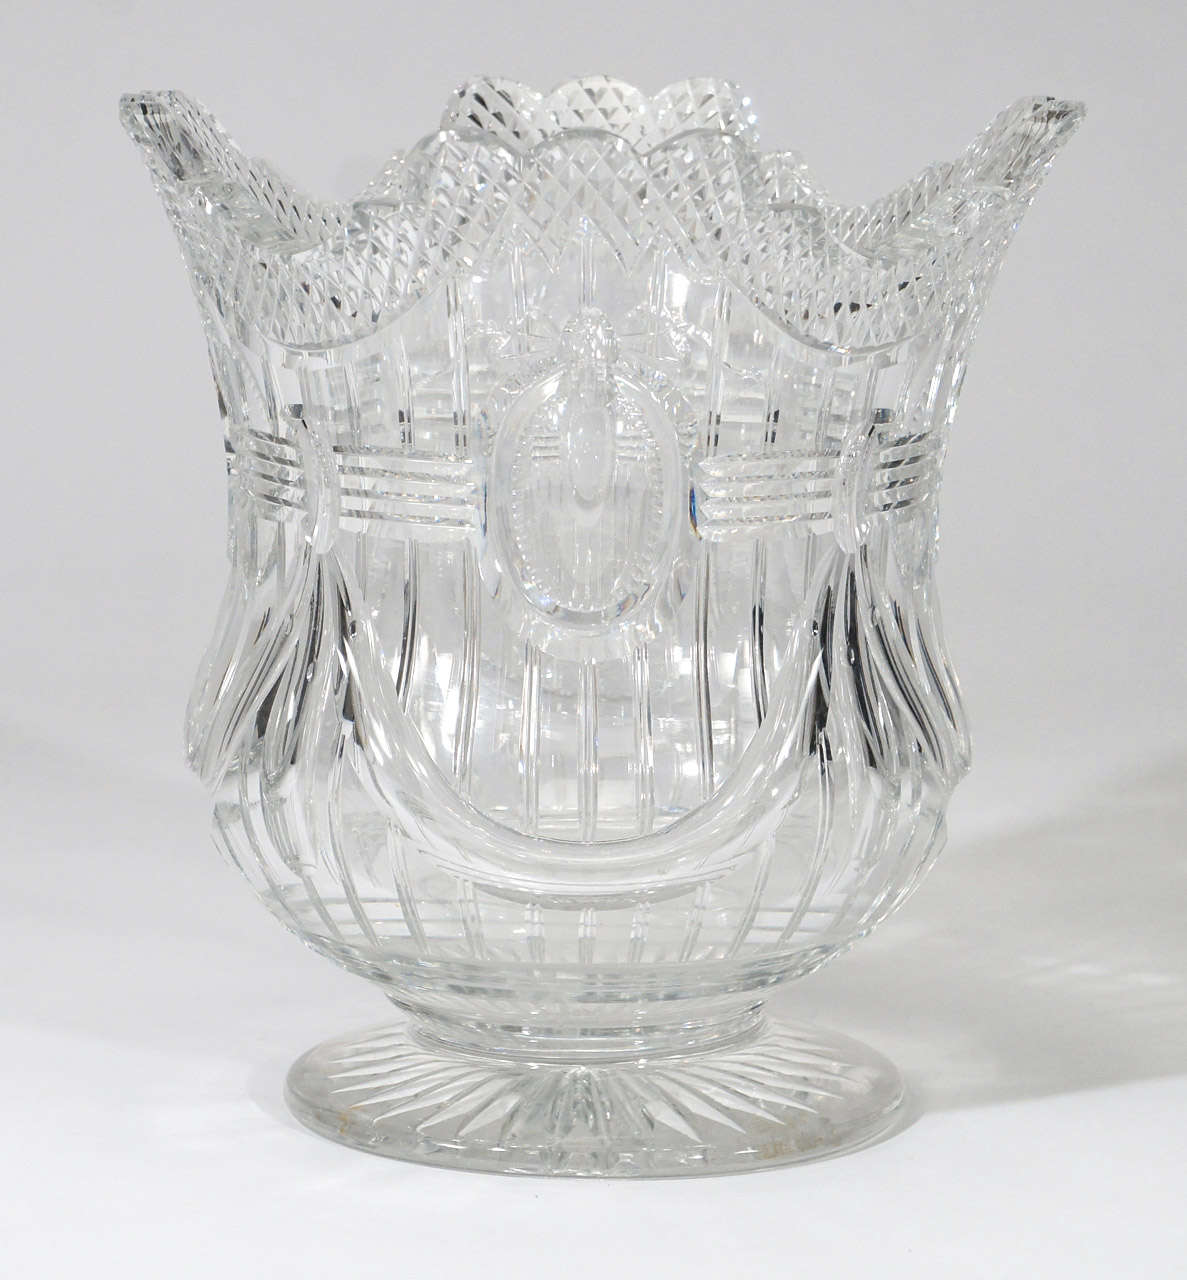 This is an extraordinary example of Thomas Webb and Sons masterful blown crystal and wheel cutting. The heavy blank weighs over 15 pounds and is expertly cut in a Georgian design of swags and central medallions.The cutting is deep, well executed and